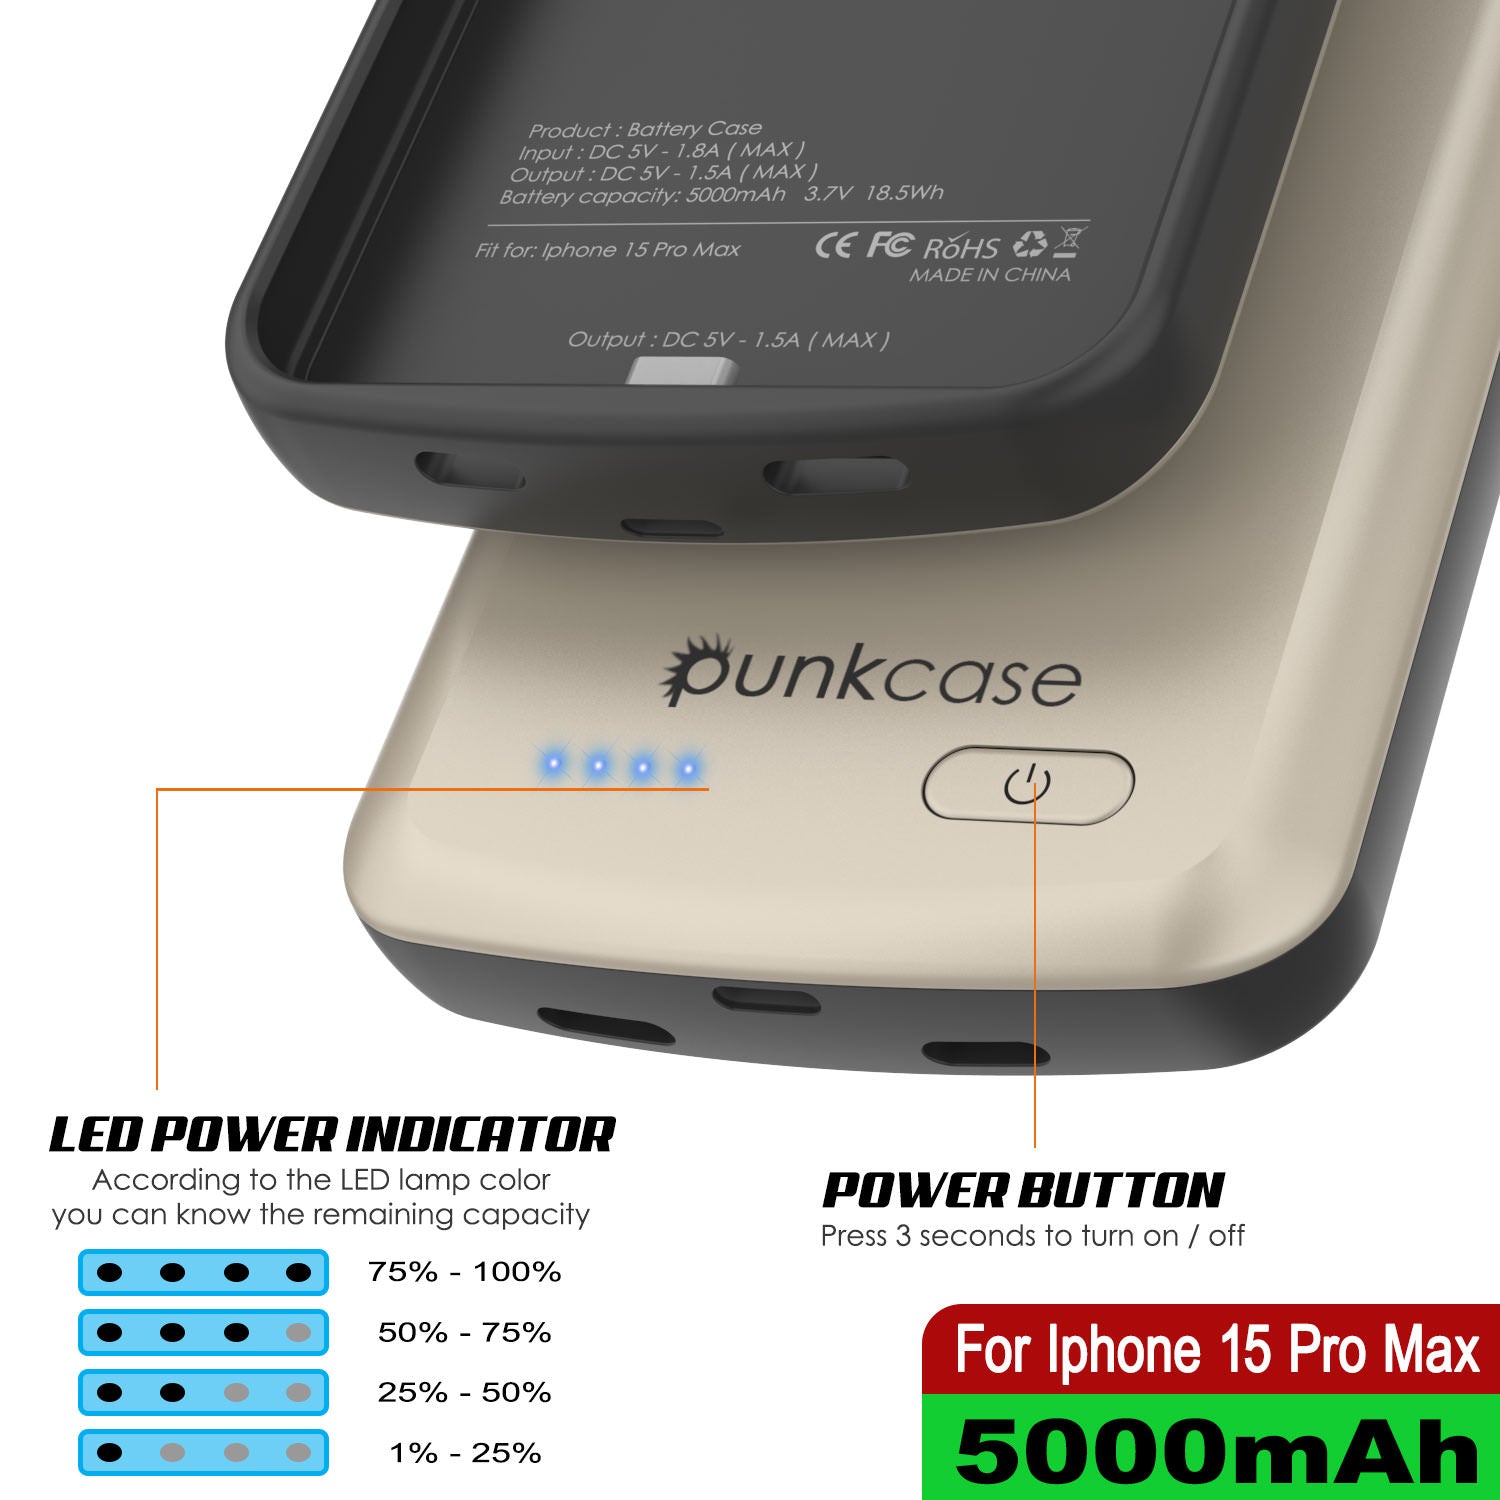 iPhone 15 Pro Max Battery Case, PunkJuice 5000mAH Fast Charging Power Bank W/ Screen Protector | [Gold]